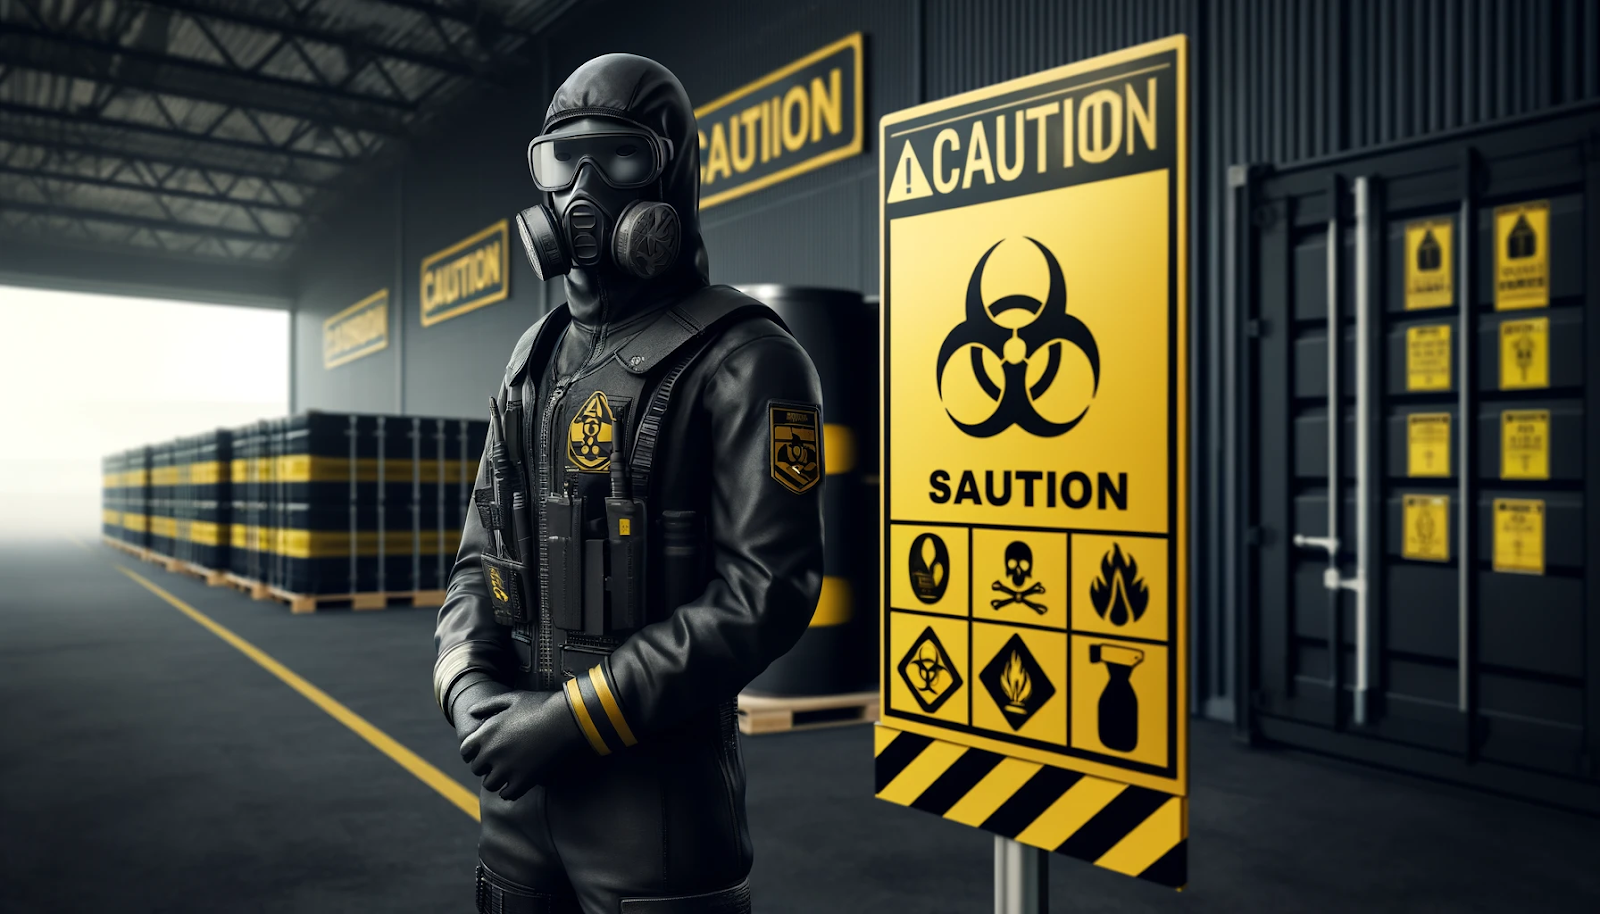 A photorealistic image of a security guard in protective gear near a caution sign with hazardous material symbols symbolizes the safe handling of hazardous materials in industrial and commercial environments. 